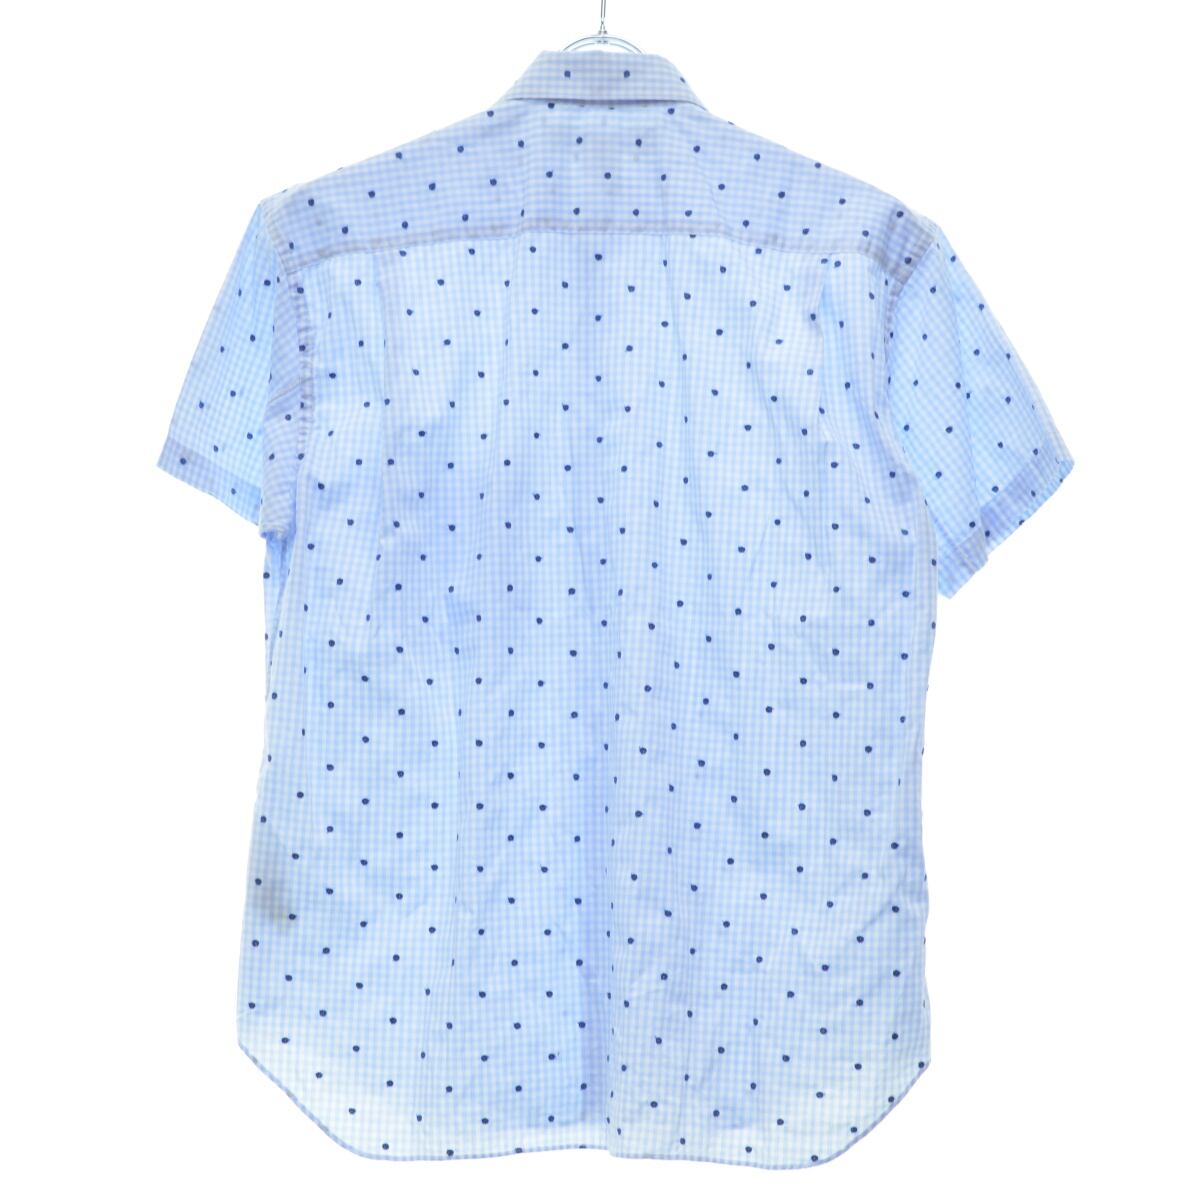 COMME des GARCONS SHIRT / コムデギャルソン シャツ 18SS S26068 ...